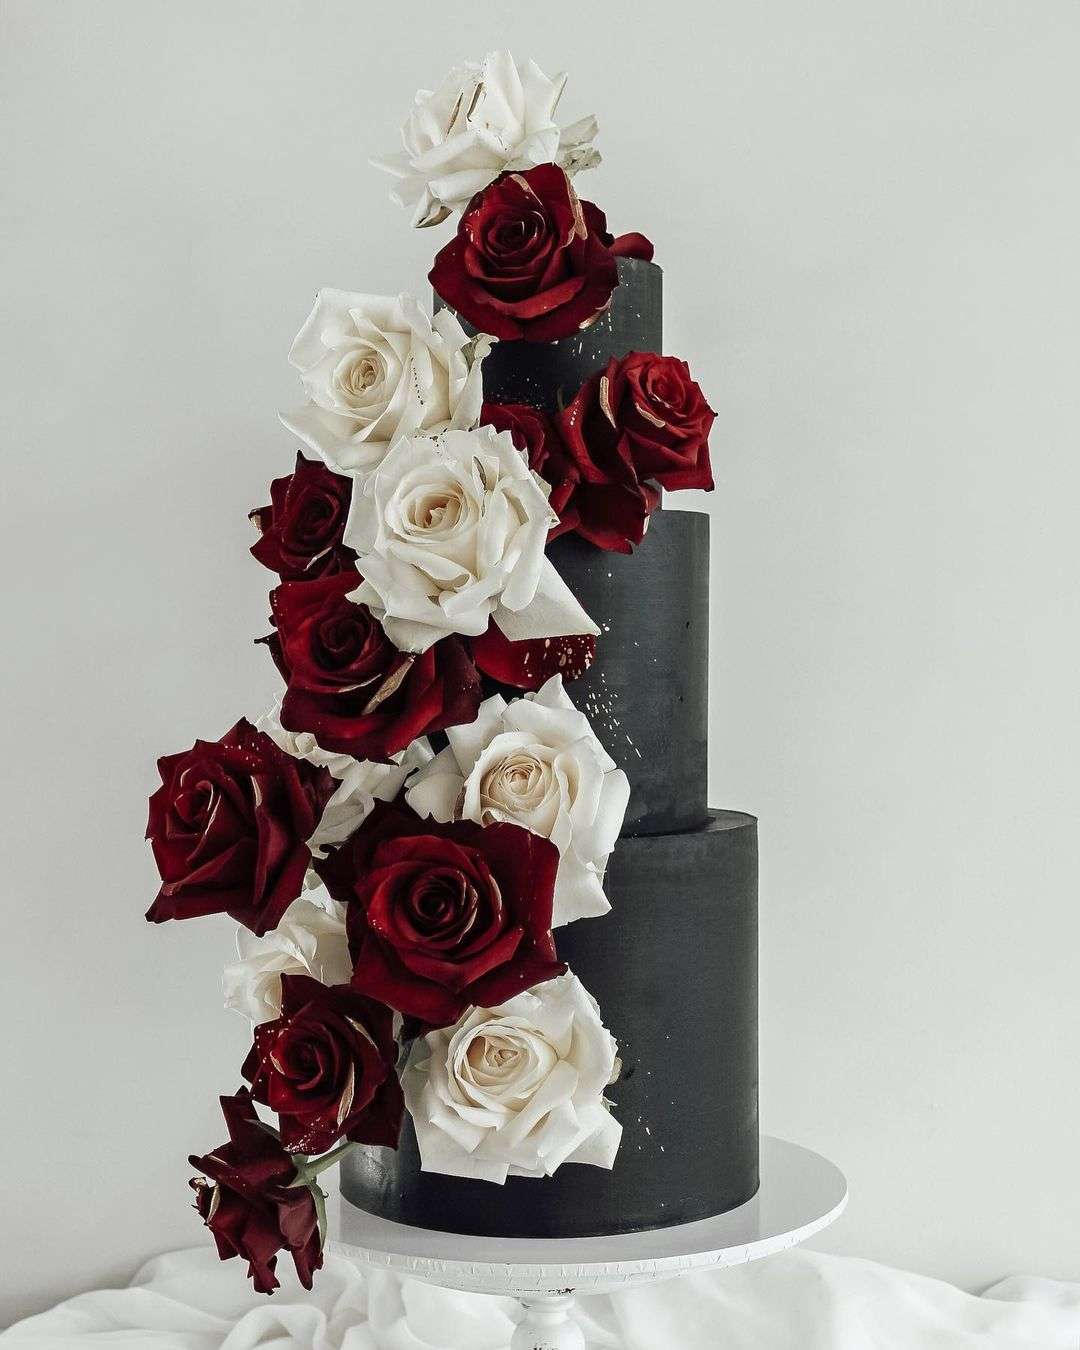 moder black wedding cakes with red and white roses via sincerelysamcakes